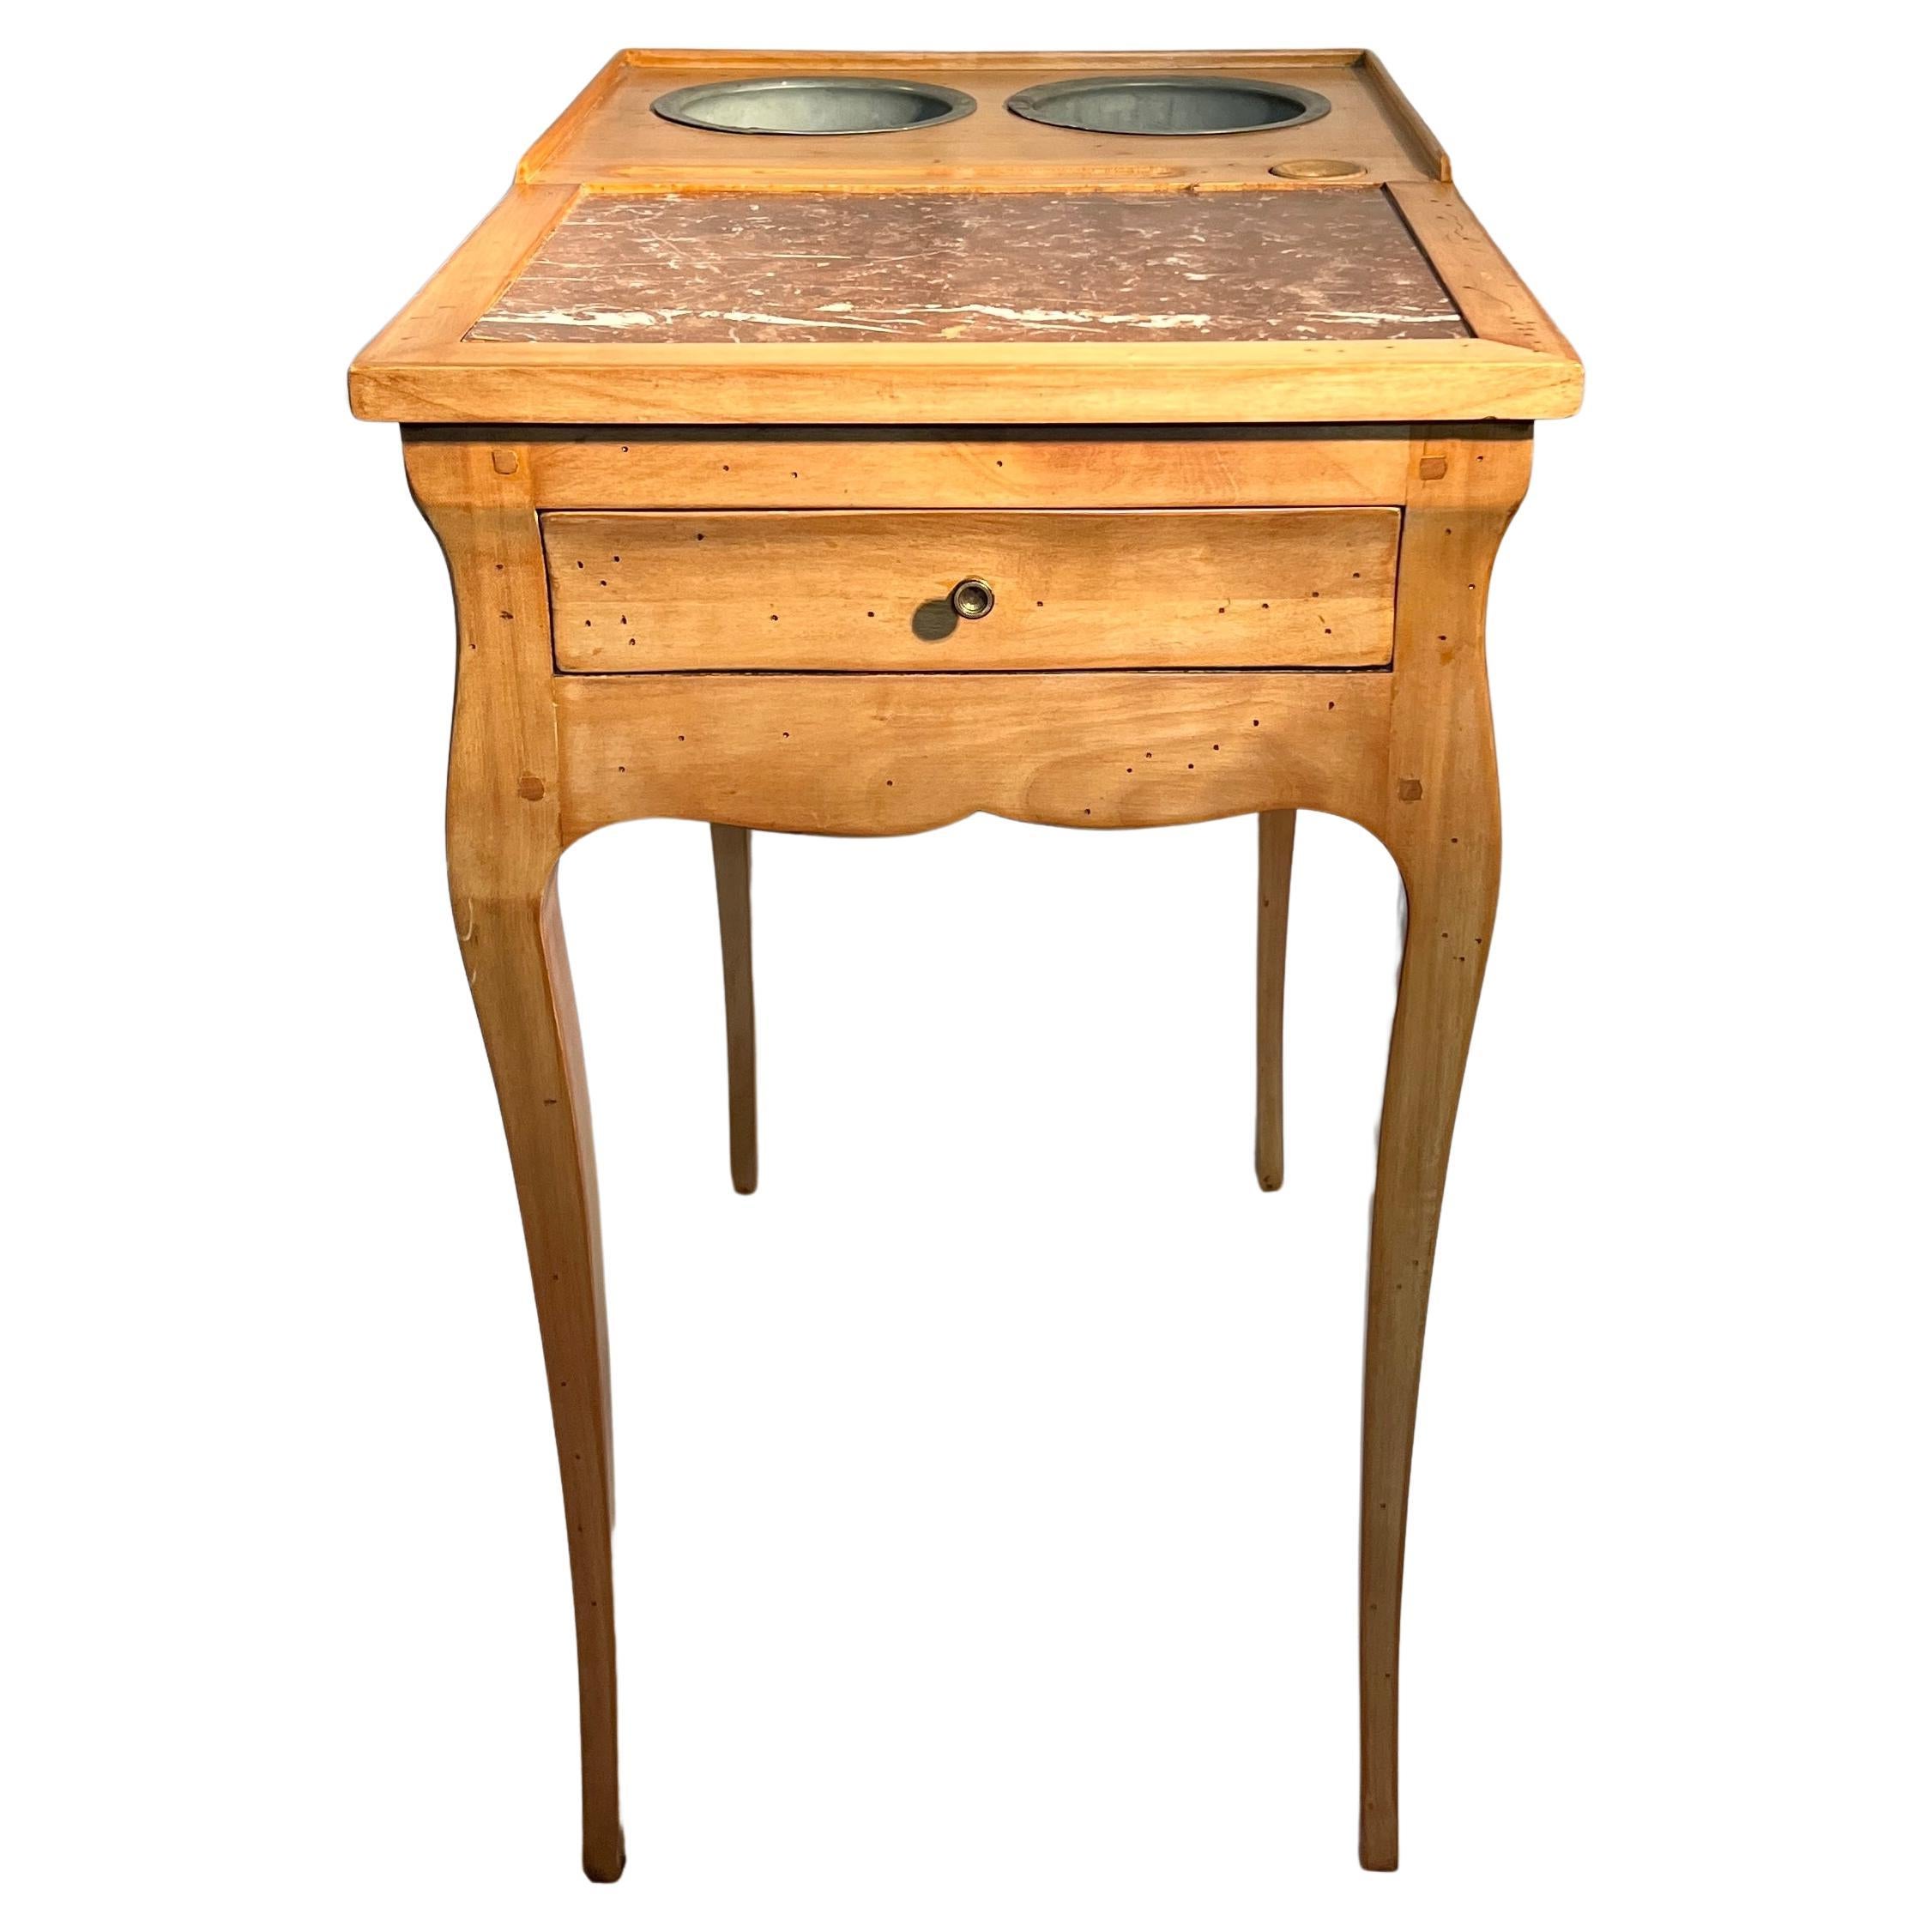 Antique French Walnut & Marble Rafraîchissoir Wine Table with Coolers Circa 1900 For Sale 1